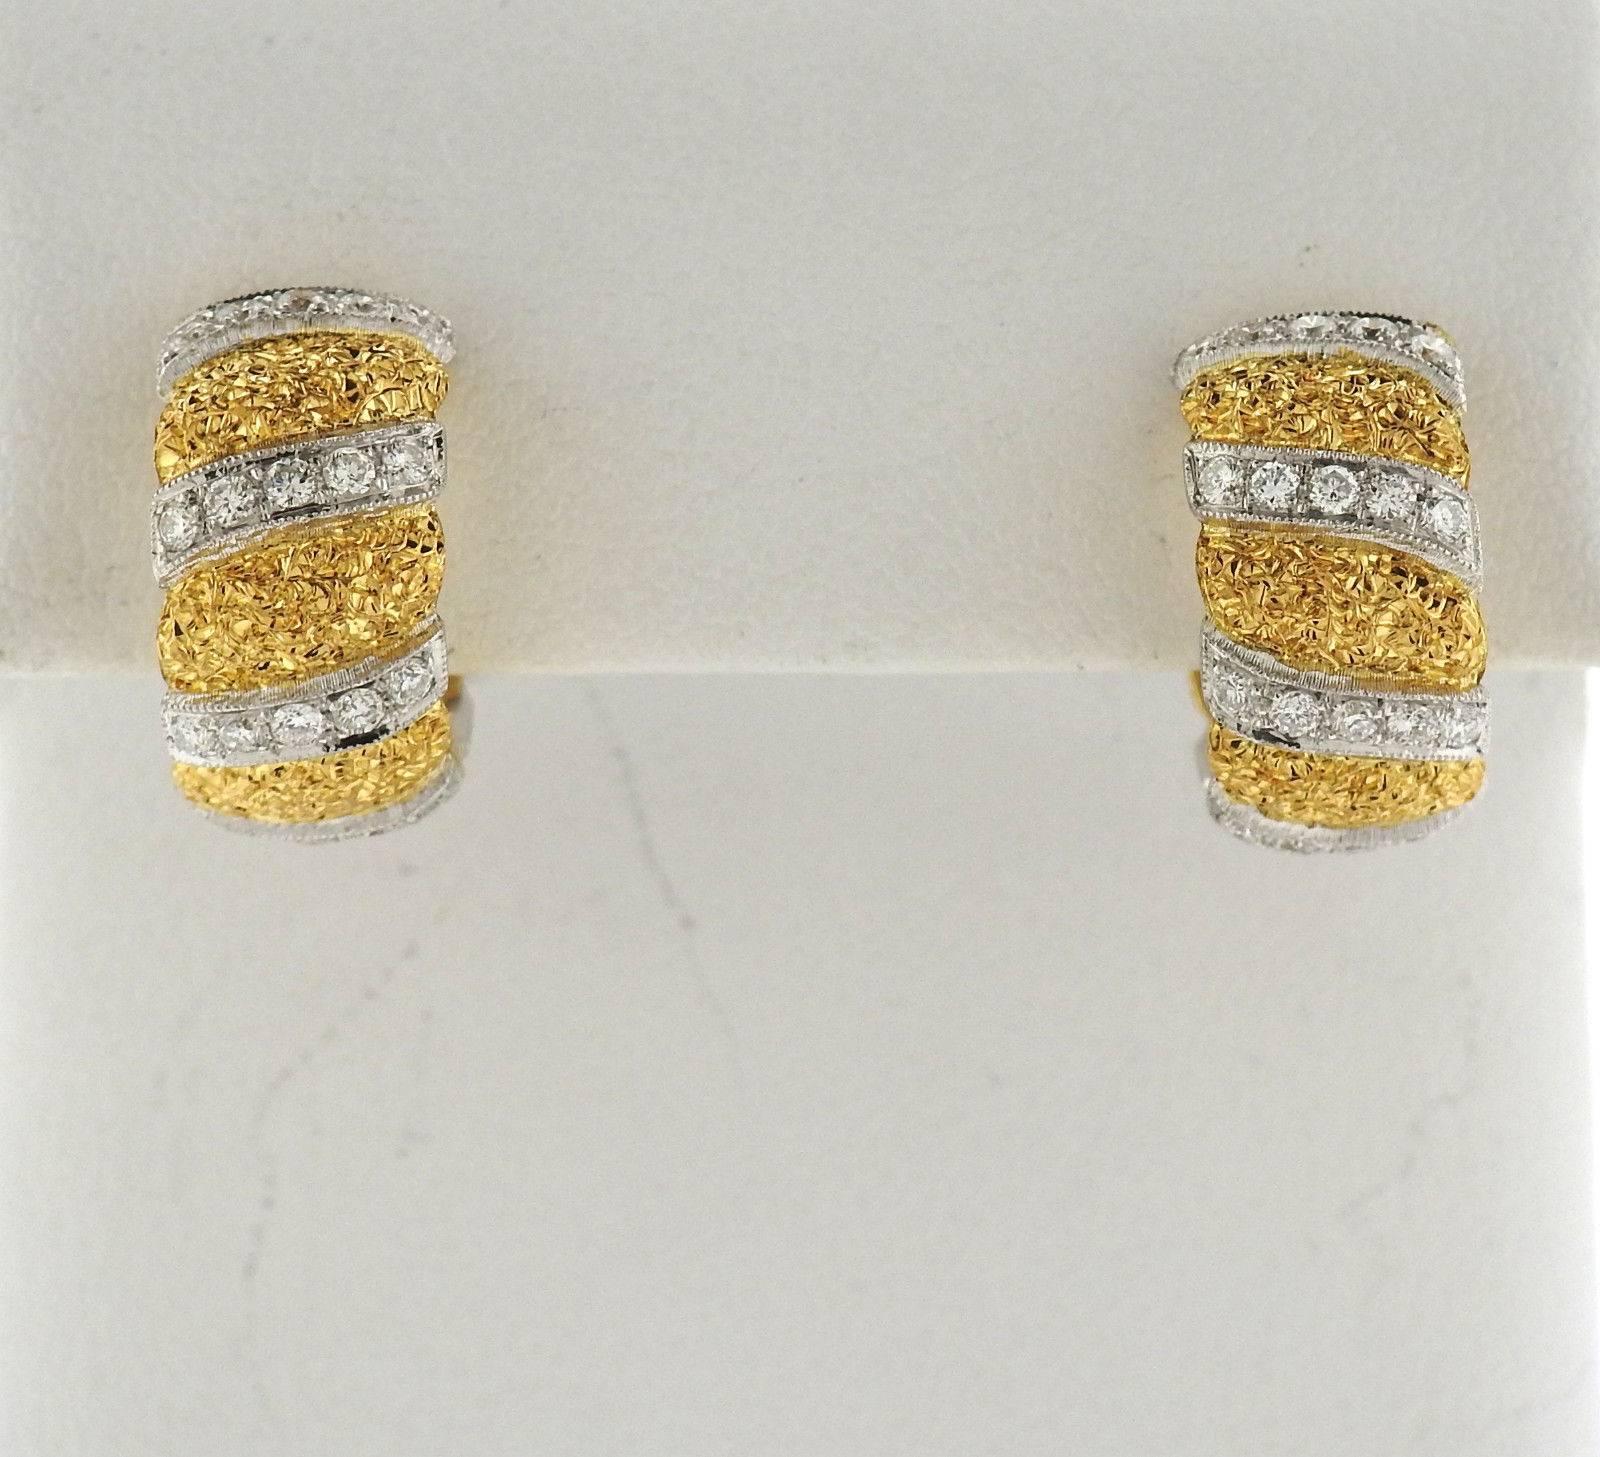 A pair of 18k white and yellow gold hoop earrings, crafted by Buccellati, featuring approximately 0.86ctw in diamonds. Earrings are 17mm in diameter x 9mm wide . Marked: Buccellati, 18k Italy . Weight: 11.8 grams 